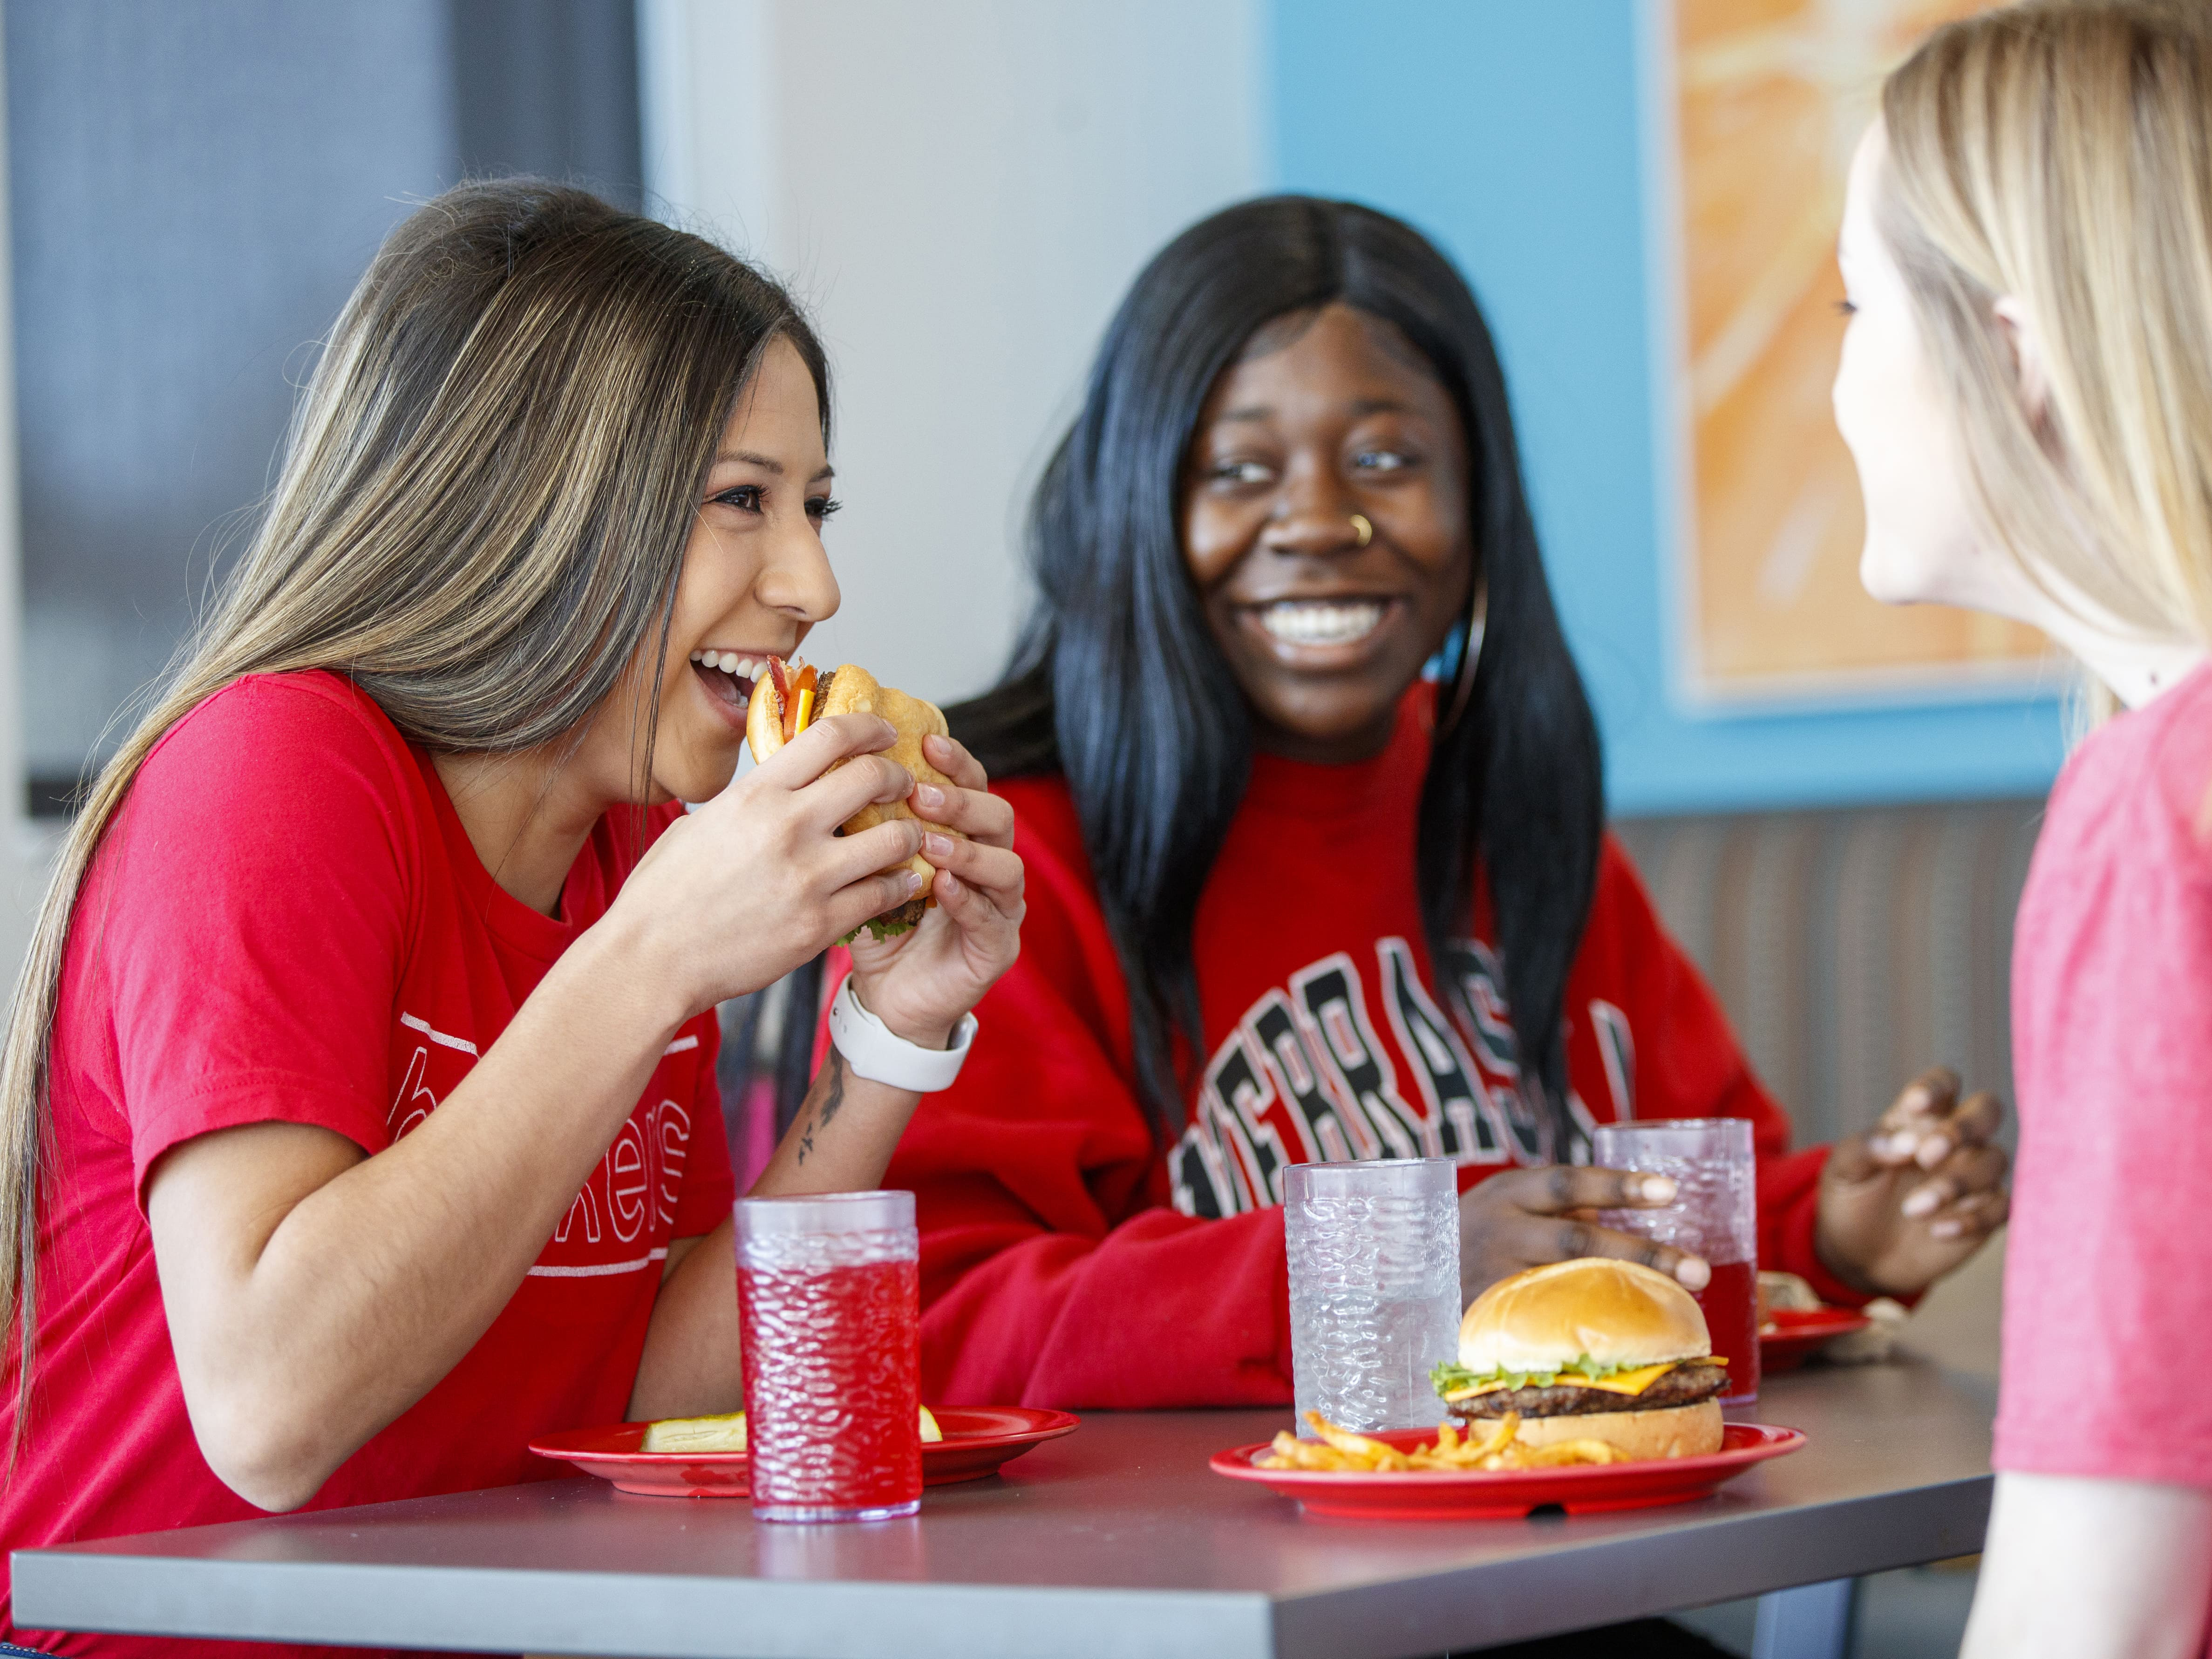 On-campus meal plans offer convenience and tasty dining options, even for students who live off-campus.